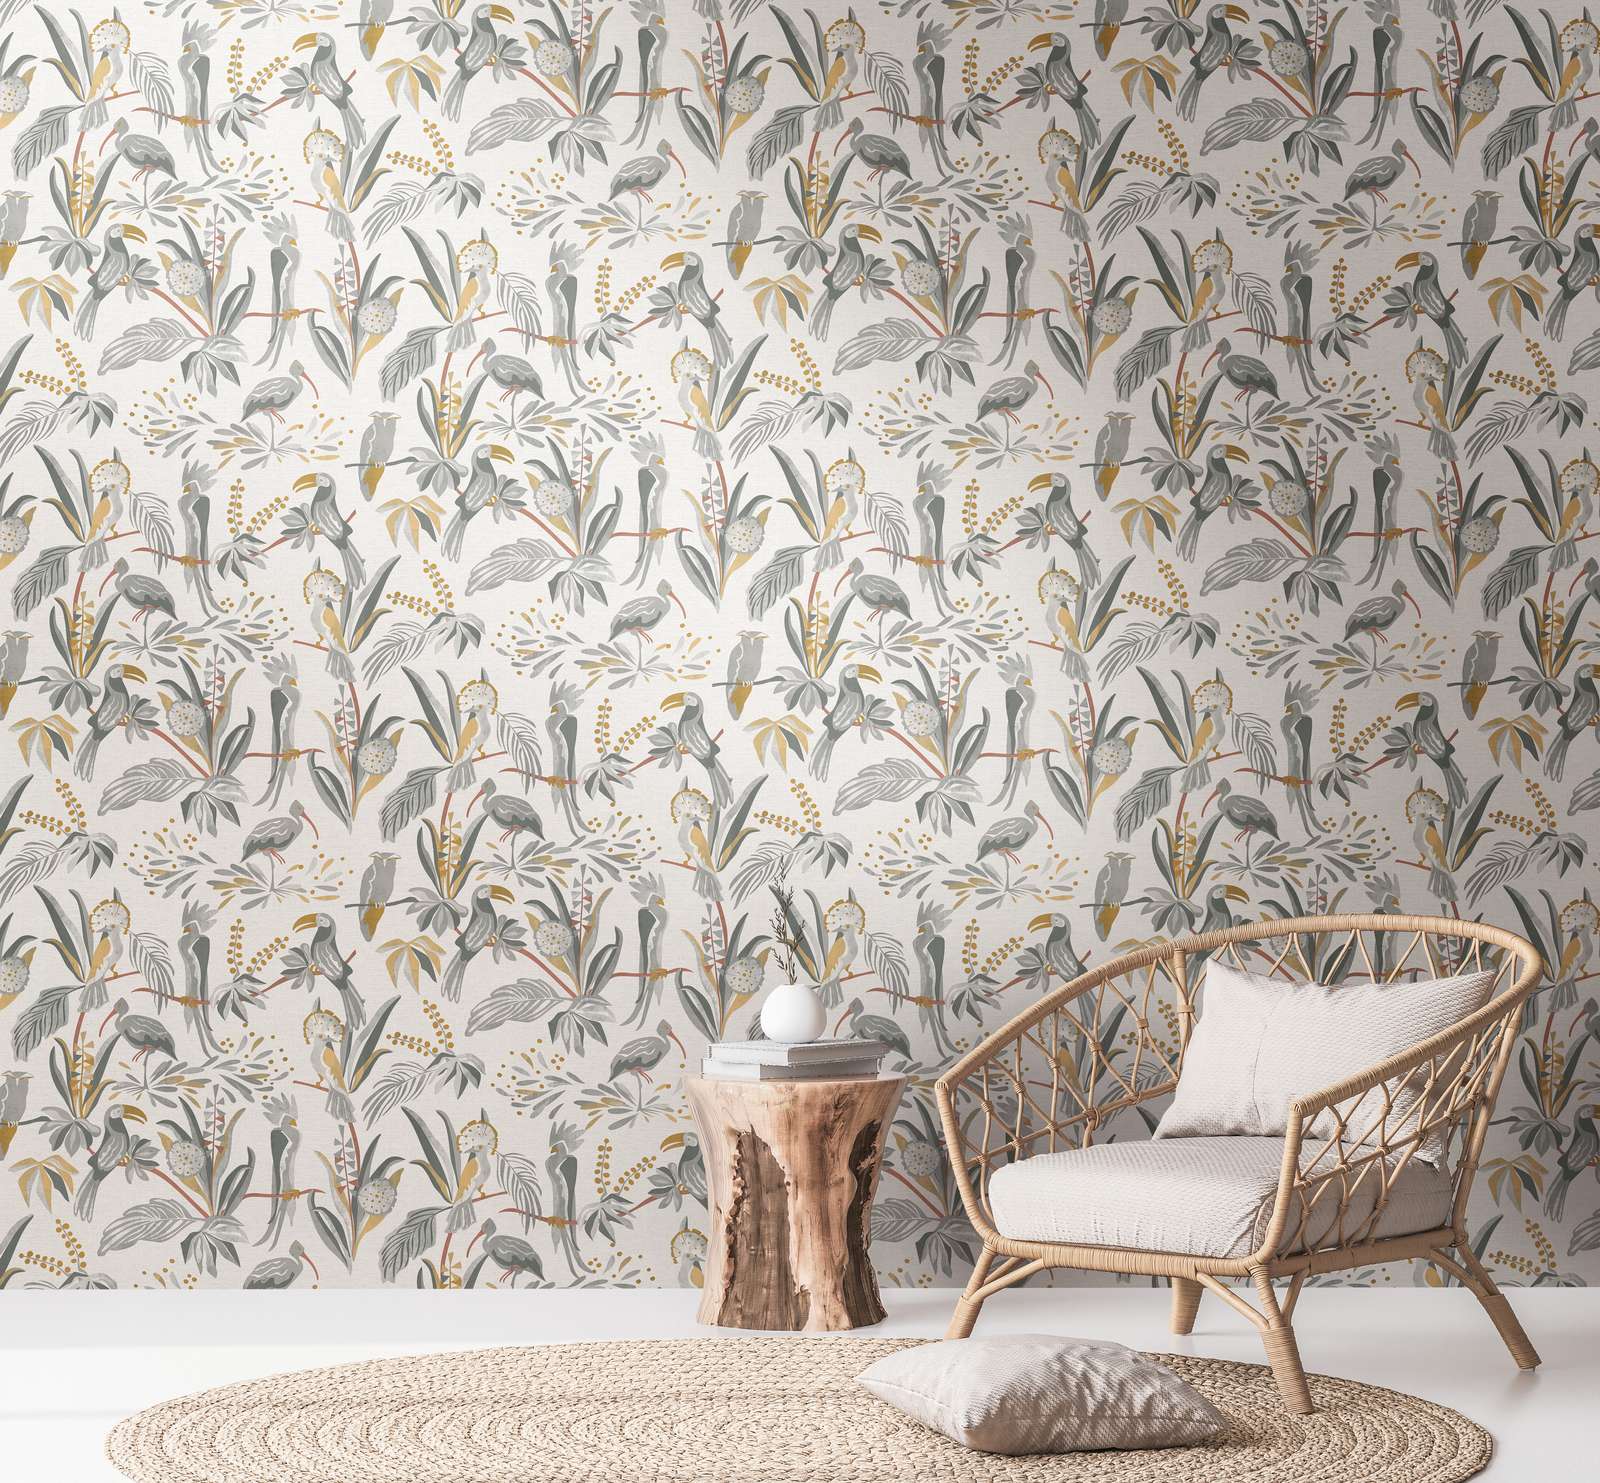             Jungle wallpaper with palm leaves & birds in linen look - grey, gold
        